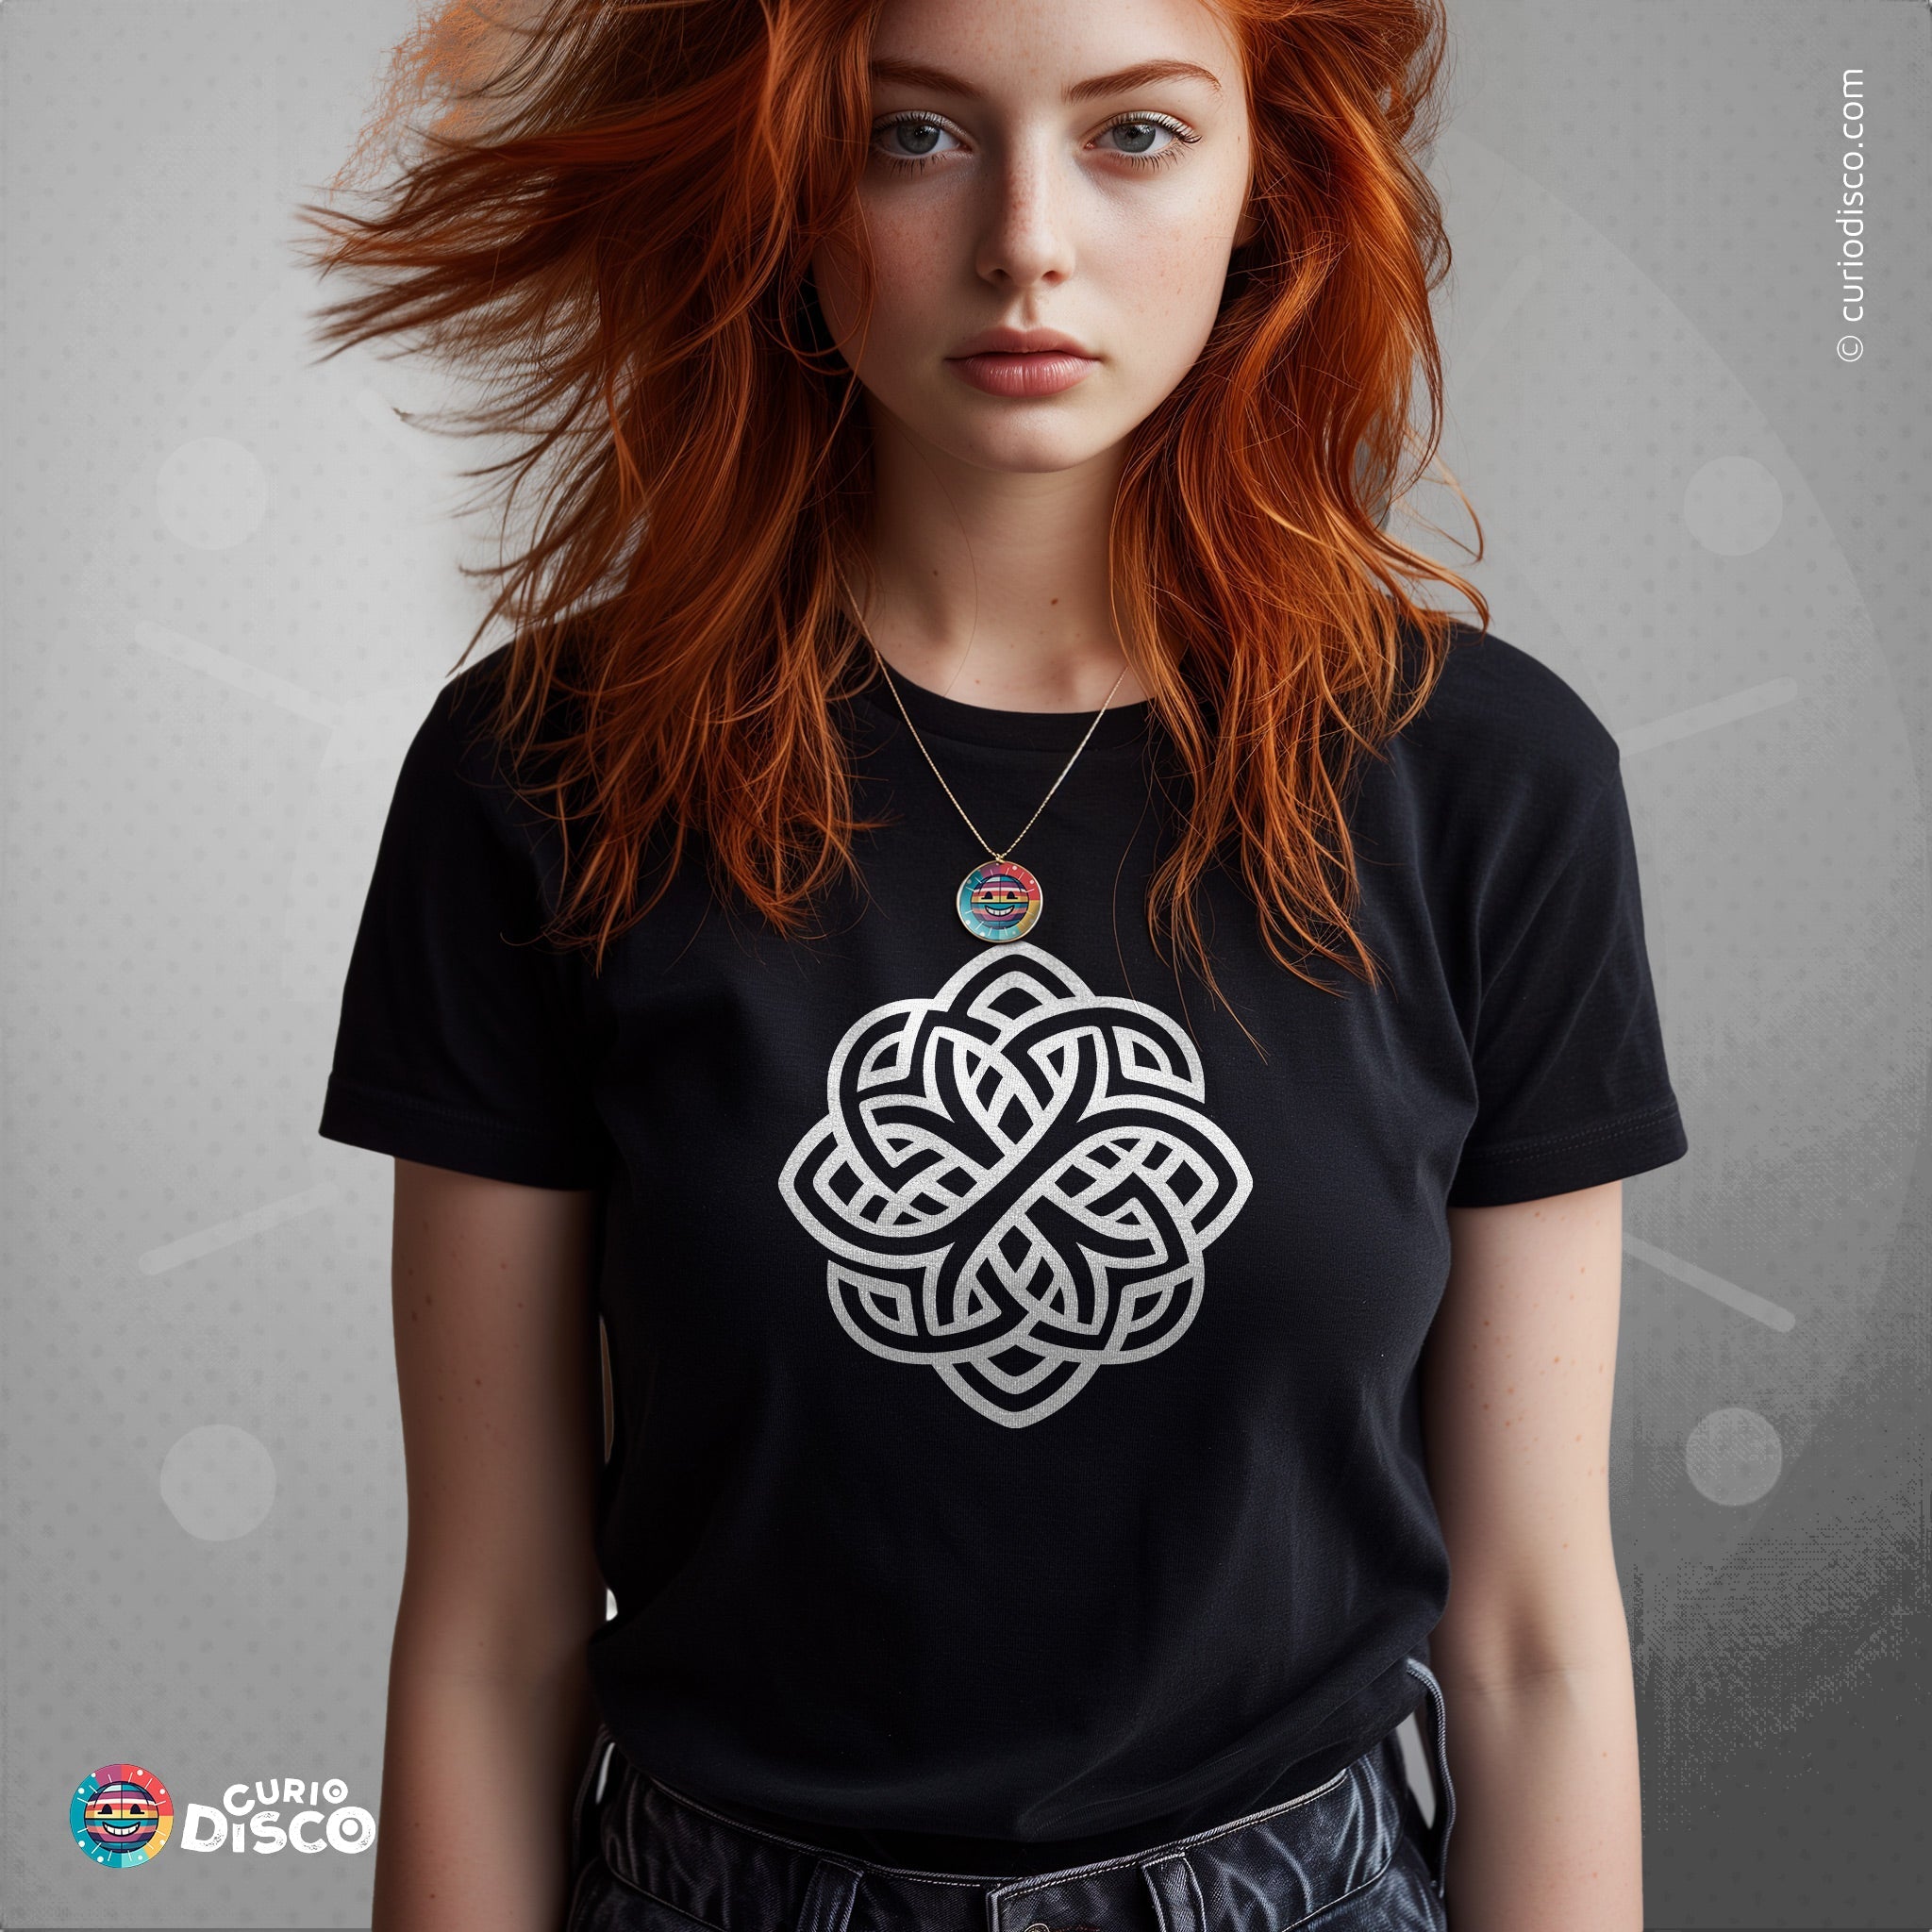 Celtic knot short sleeve tshirt featuring artistic line art of interwoven oak tree roots. Made of soft, 100% cotton, it's breathable with a classic crew neck and short sleeves for a regular fit. This tee is ideal for daily wear and gym activities. The design embodies zen, symbolizing strength, wisdom, and endurance.